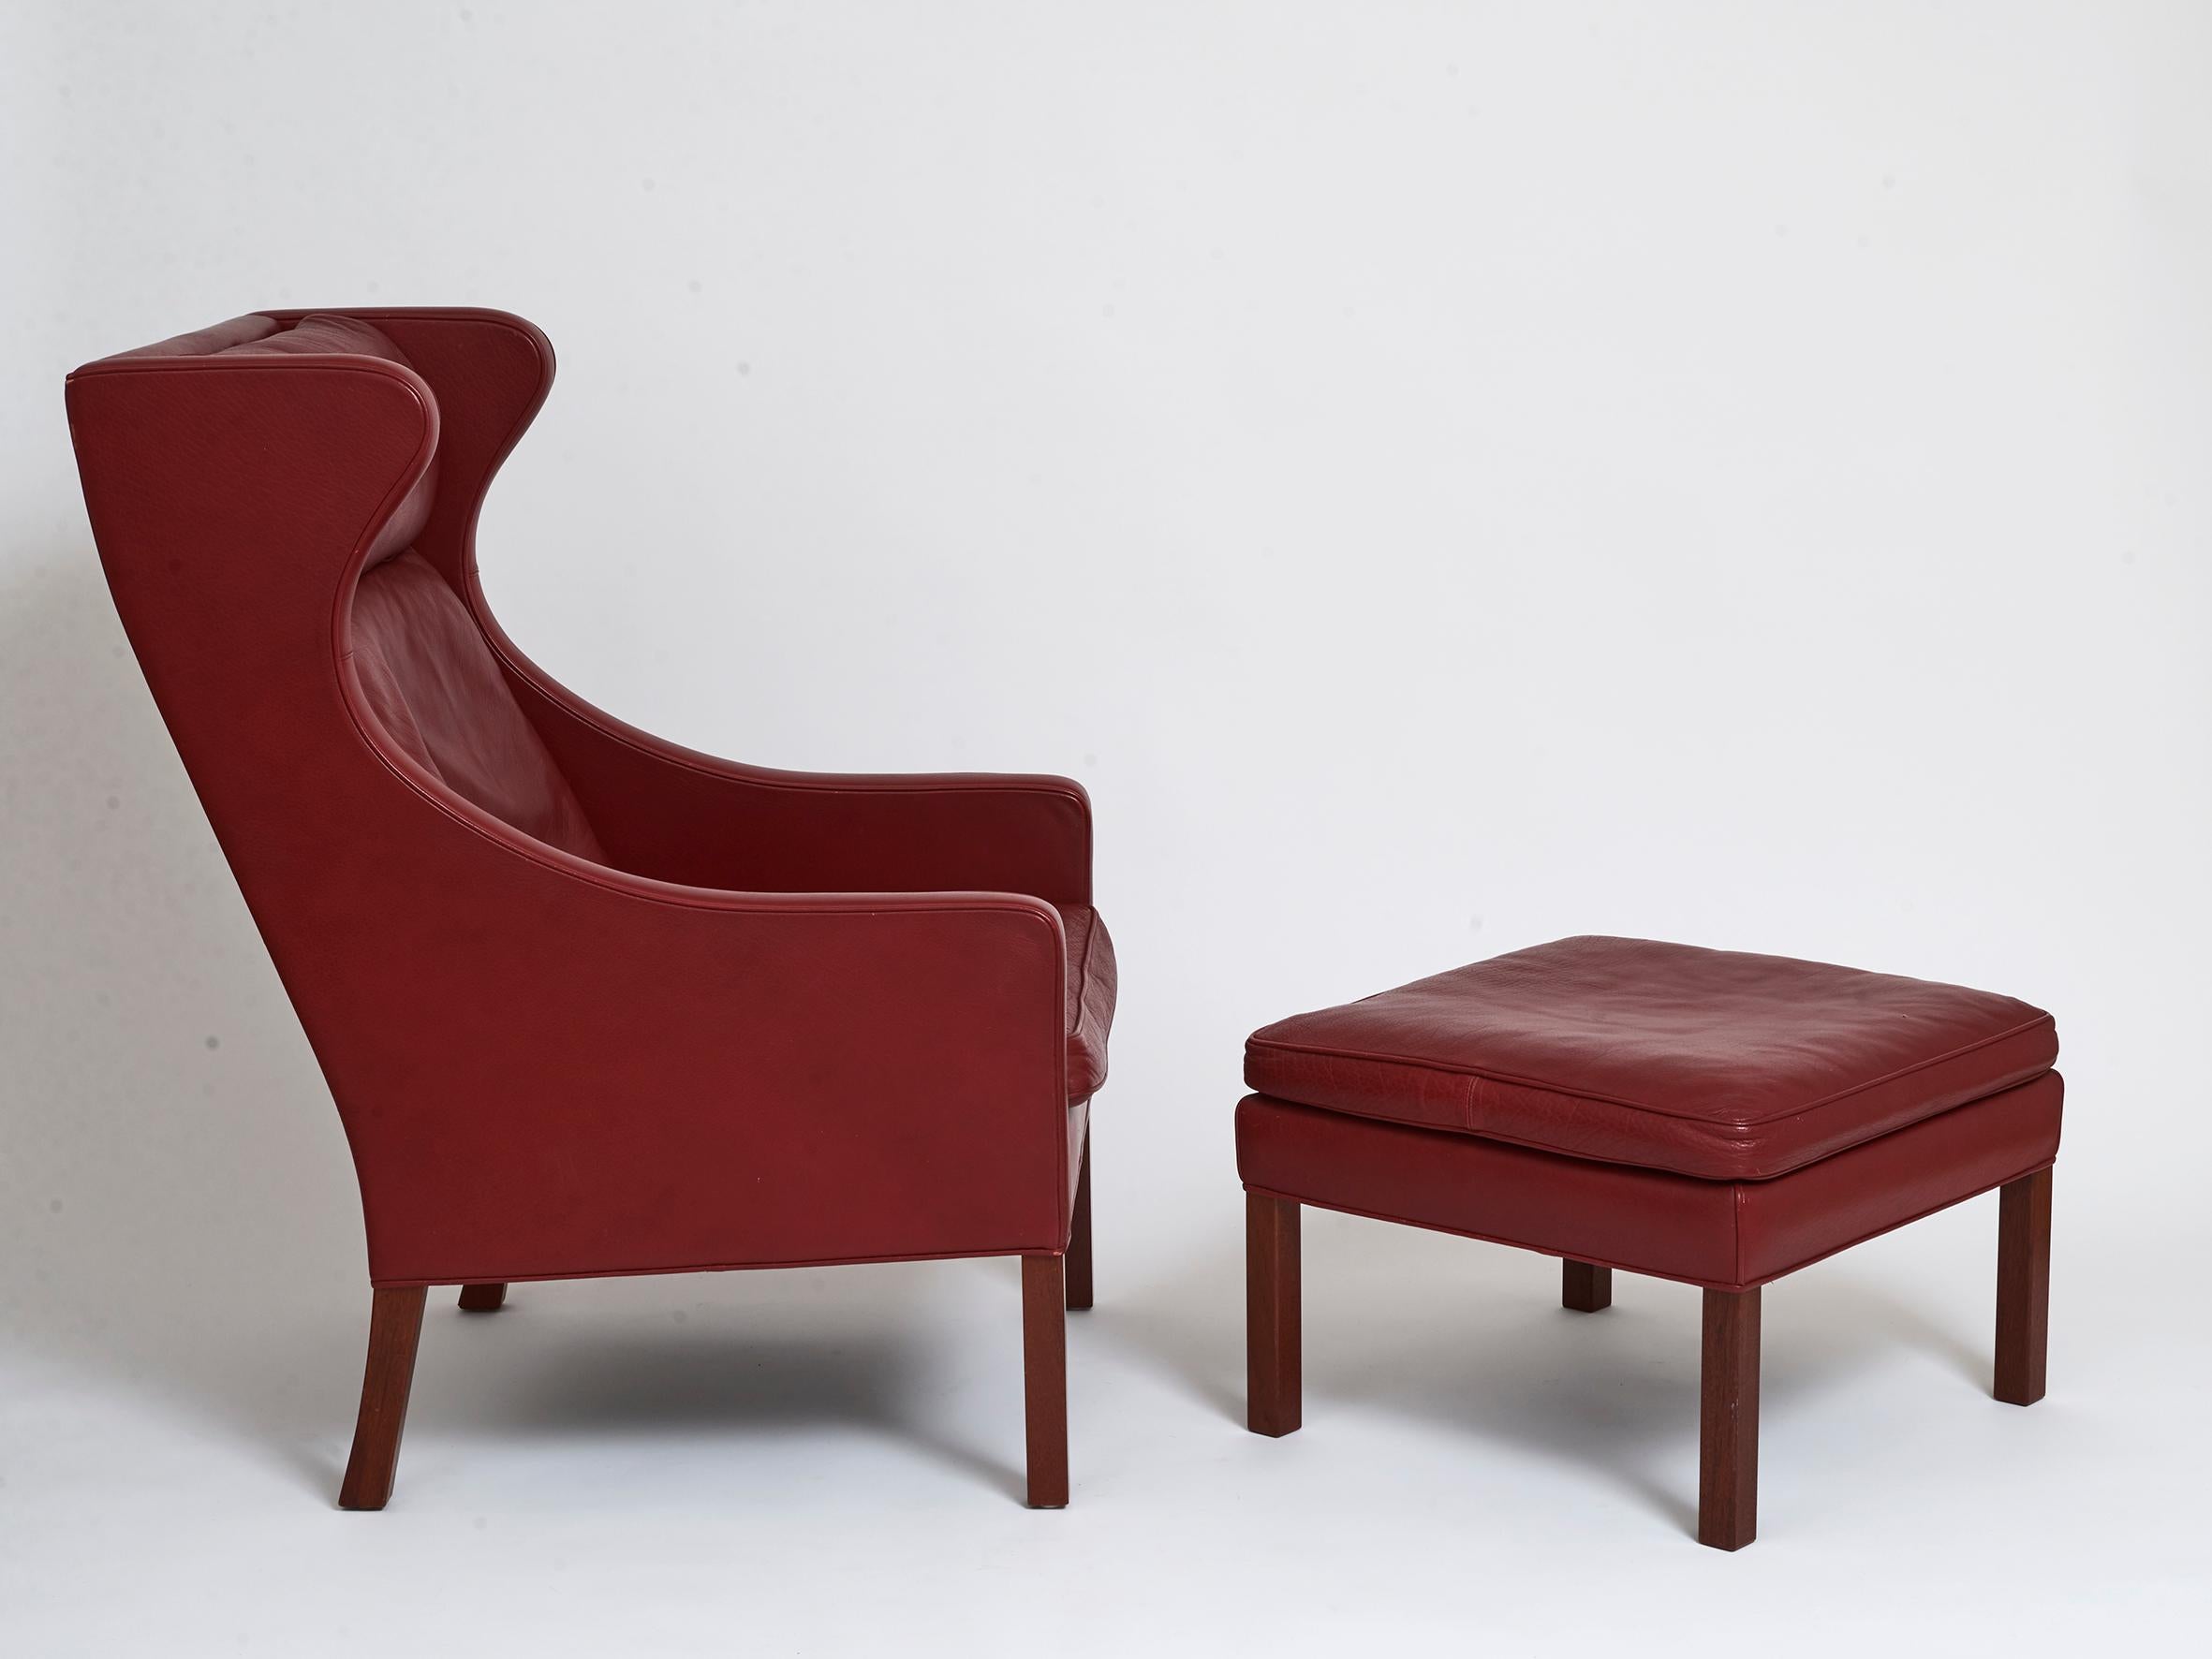 A Danish armchair and footstool in rich burgundy leather and stained beech legs. Designed by Børge Mogensen and produced by A/S Fredericia Stolefabrik
Original design 1963. This set from 1980s
Footstool measurements 40.5cm high 60cm square.

 